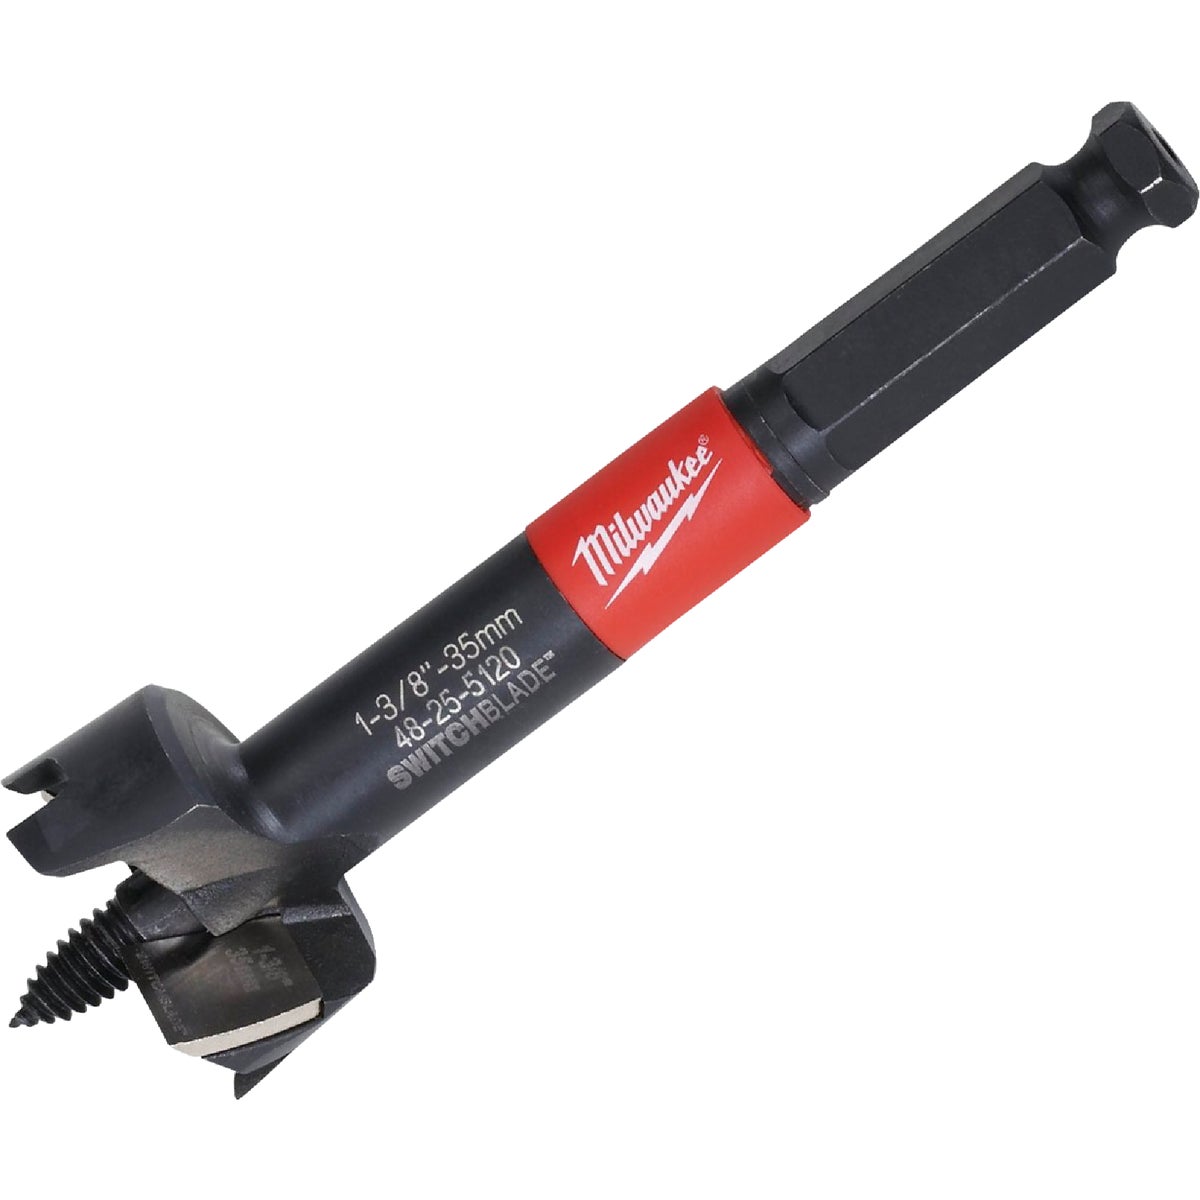 Item 362468, Switchblade Selfeed bits are designed for drilling holes in all types of 